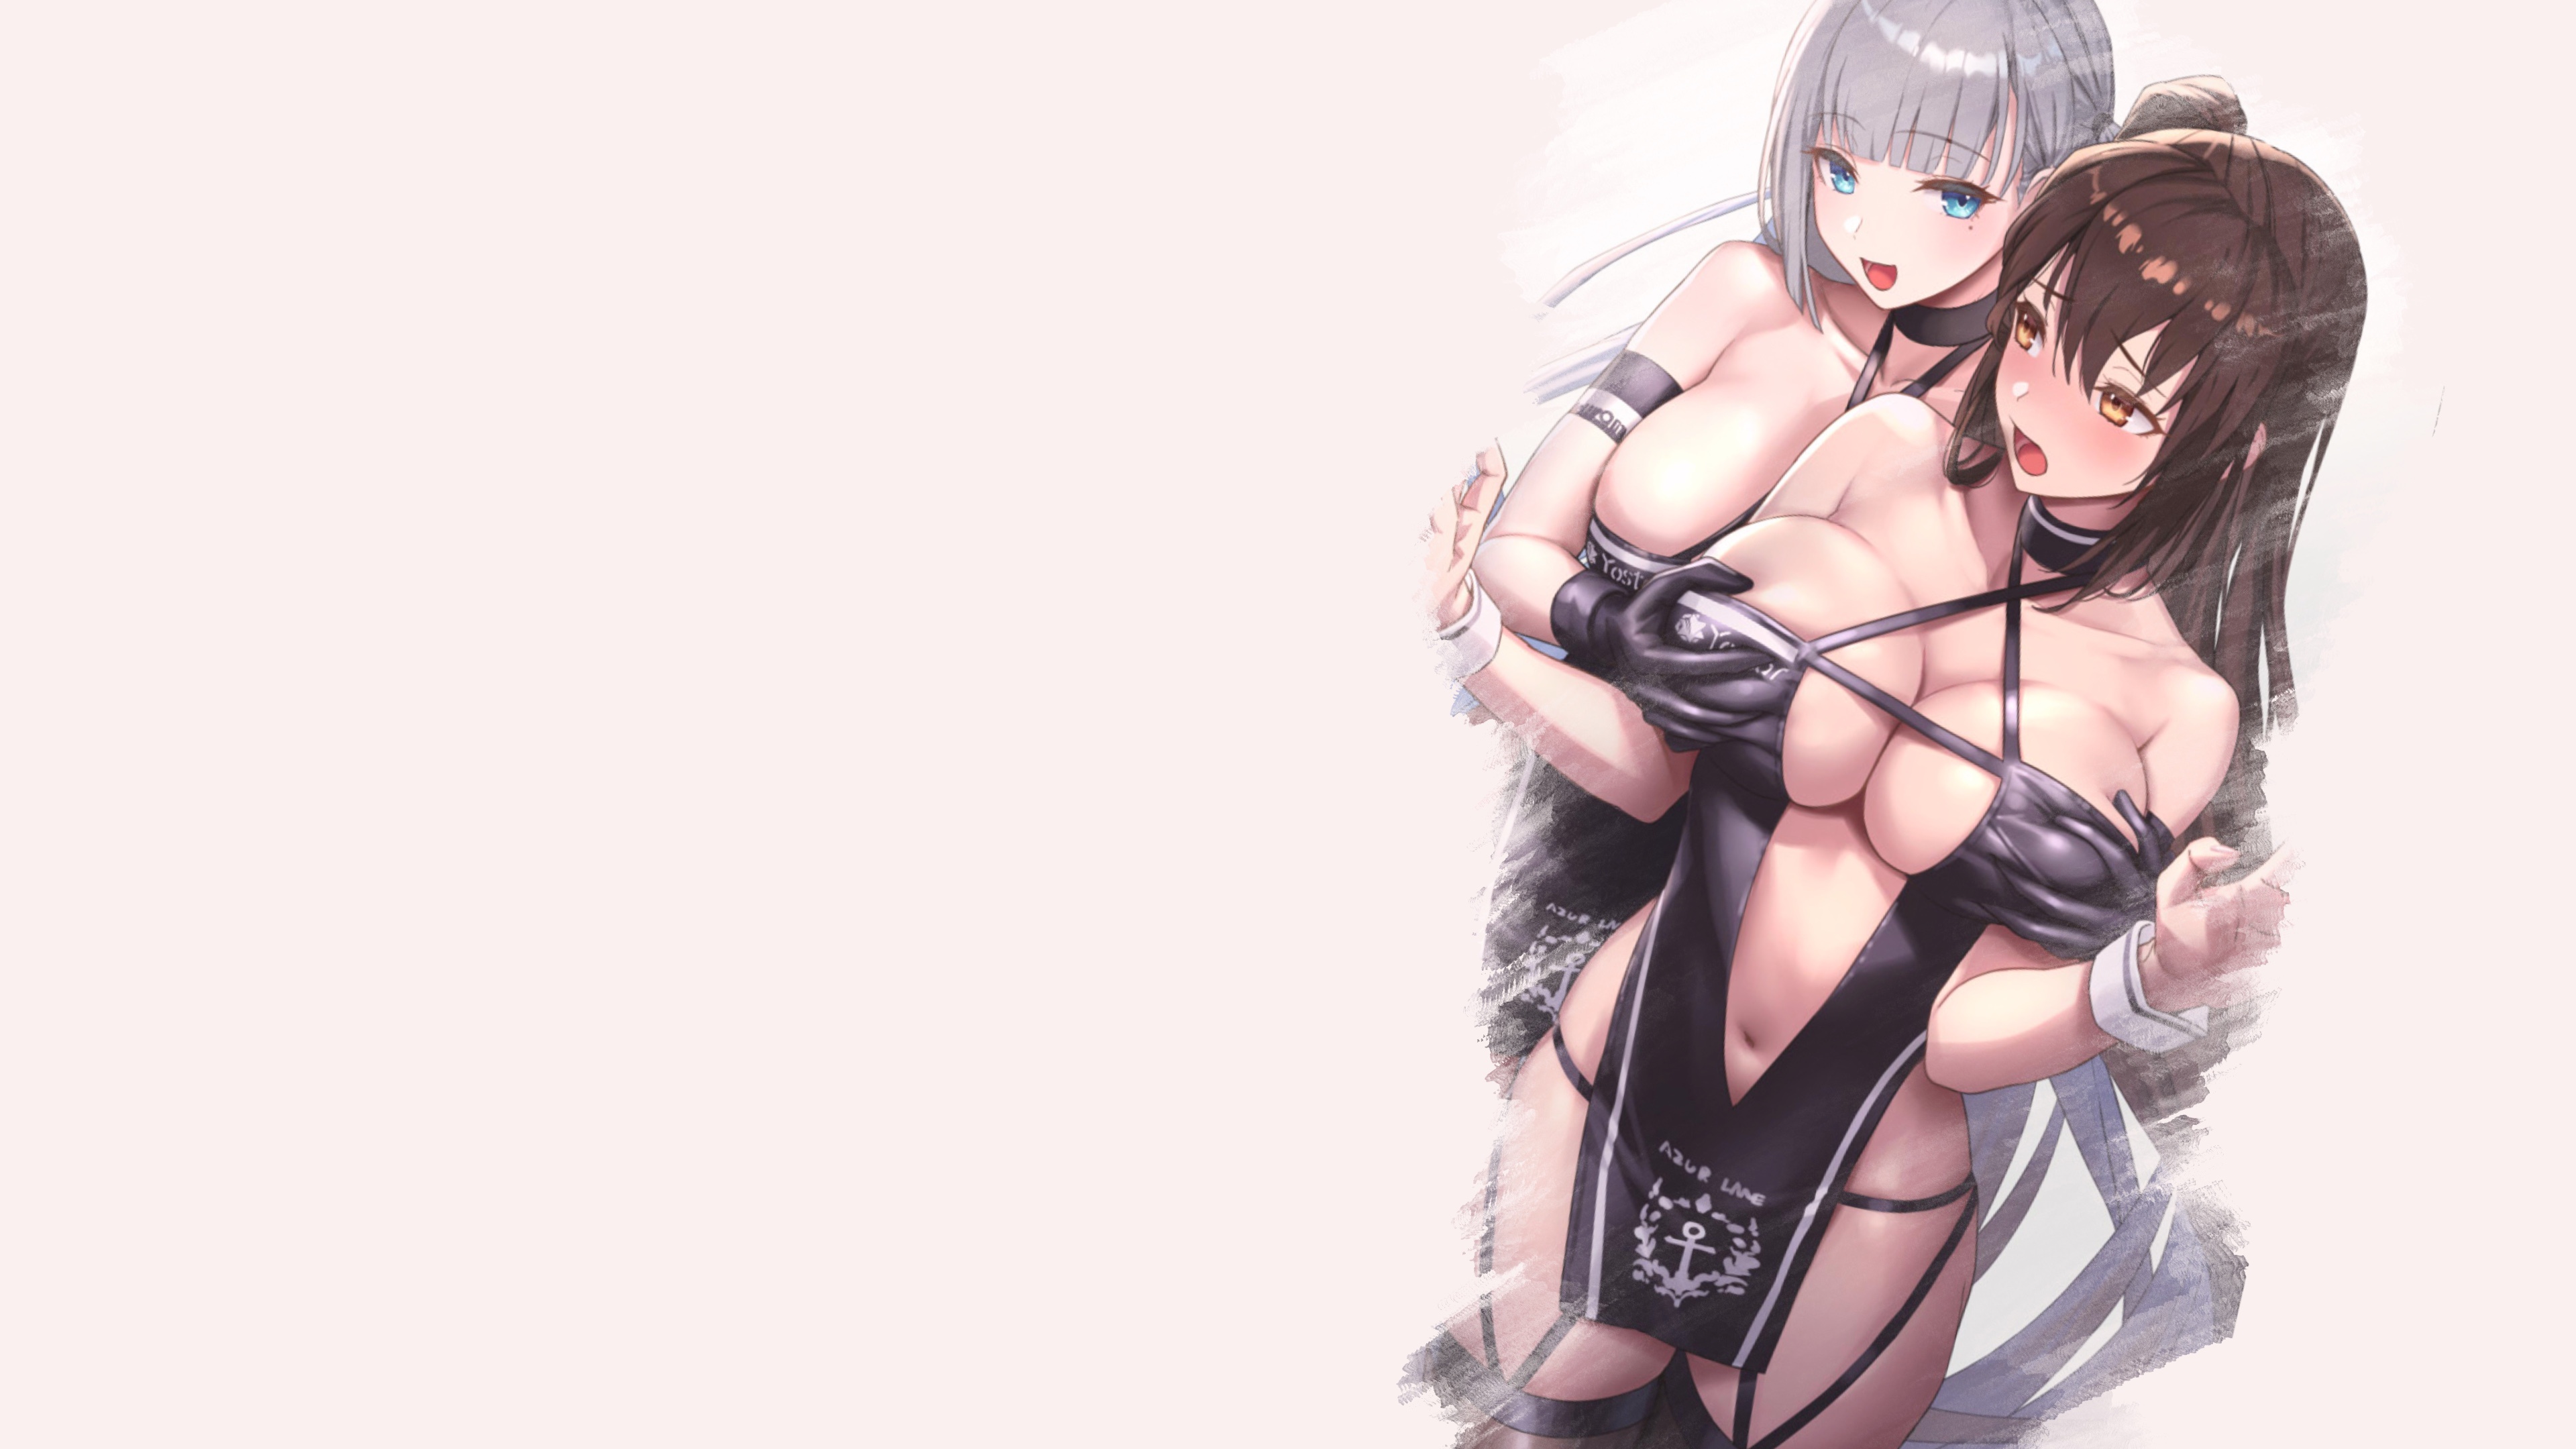 Download wallpaper girl, boobs, big, anime, soft, big boobs, babe, oppai,  section seinen in resolution 640x1136